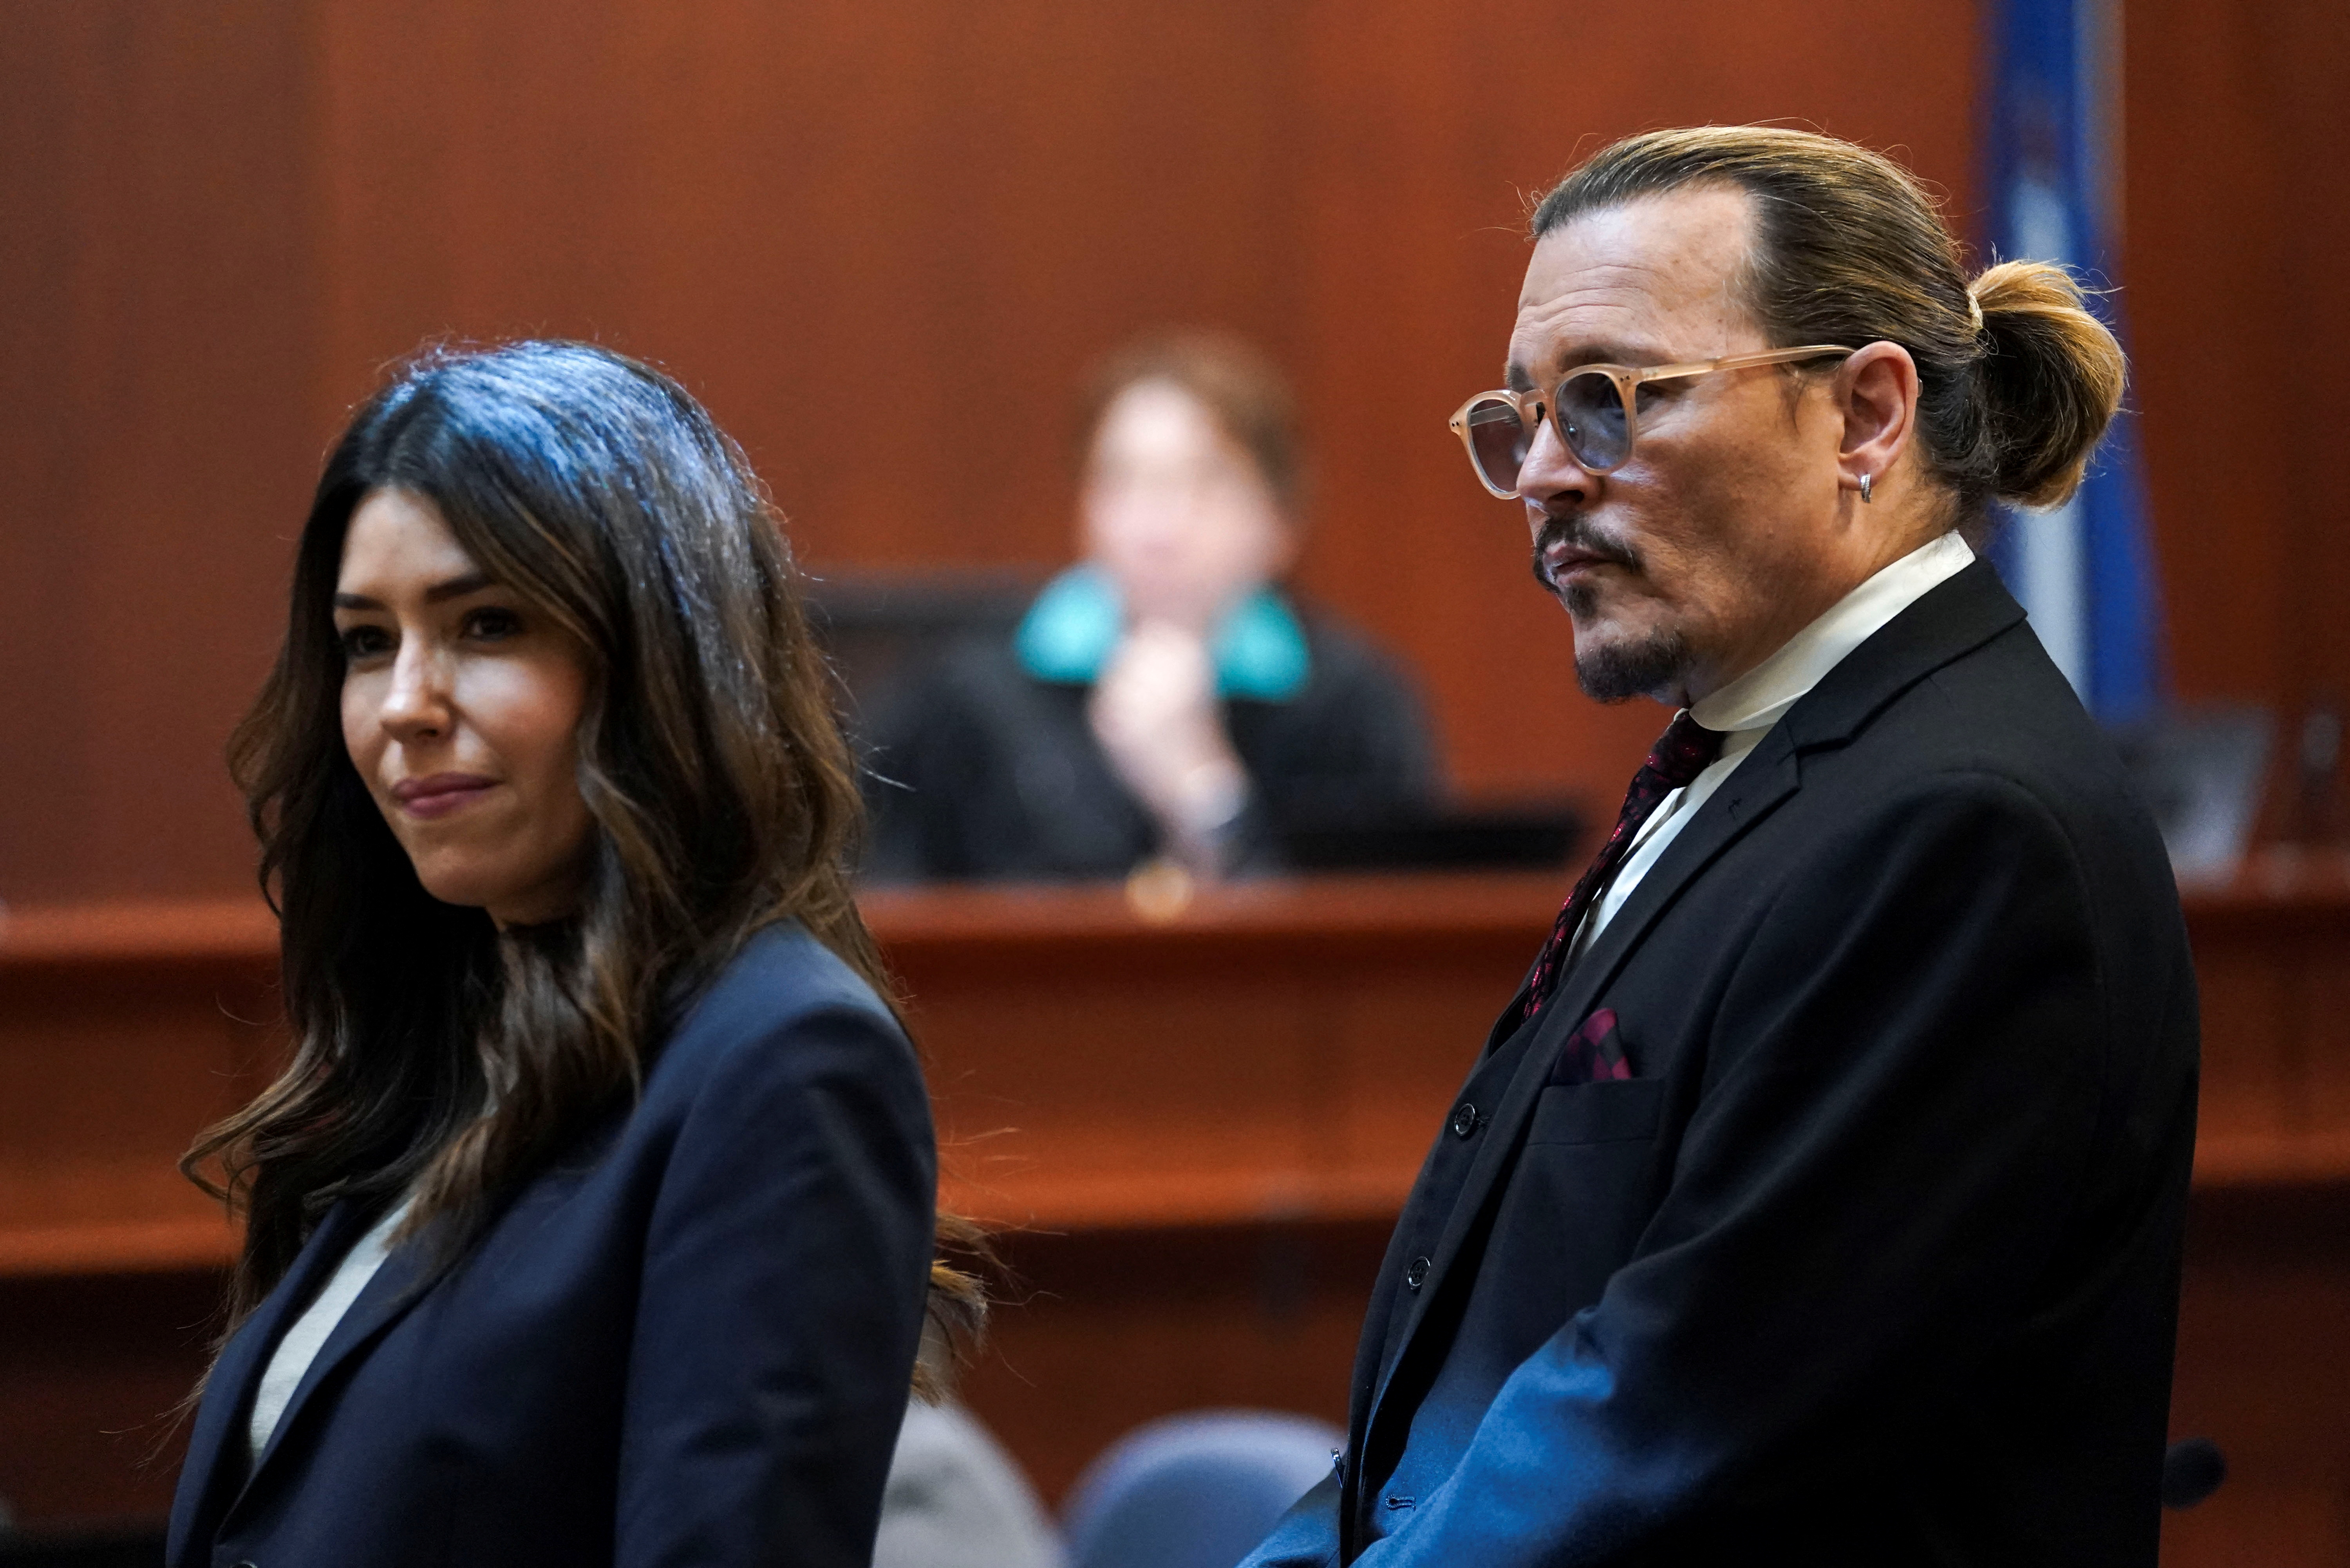 Johnny Depp with his lawyer Camille Vasquez in the trial against Amber Heard for defamation (Reuters)